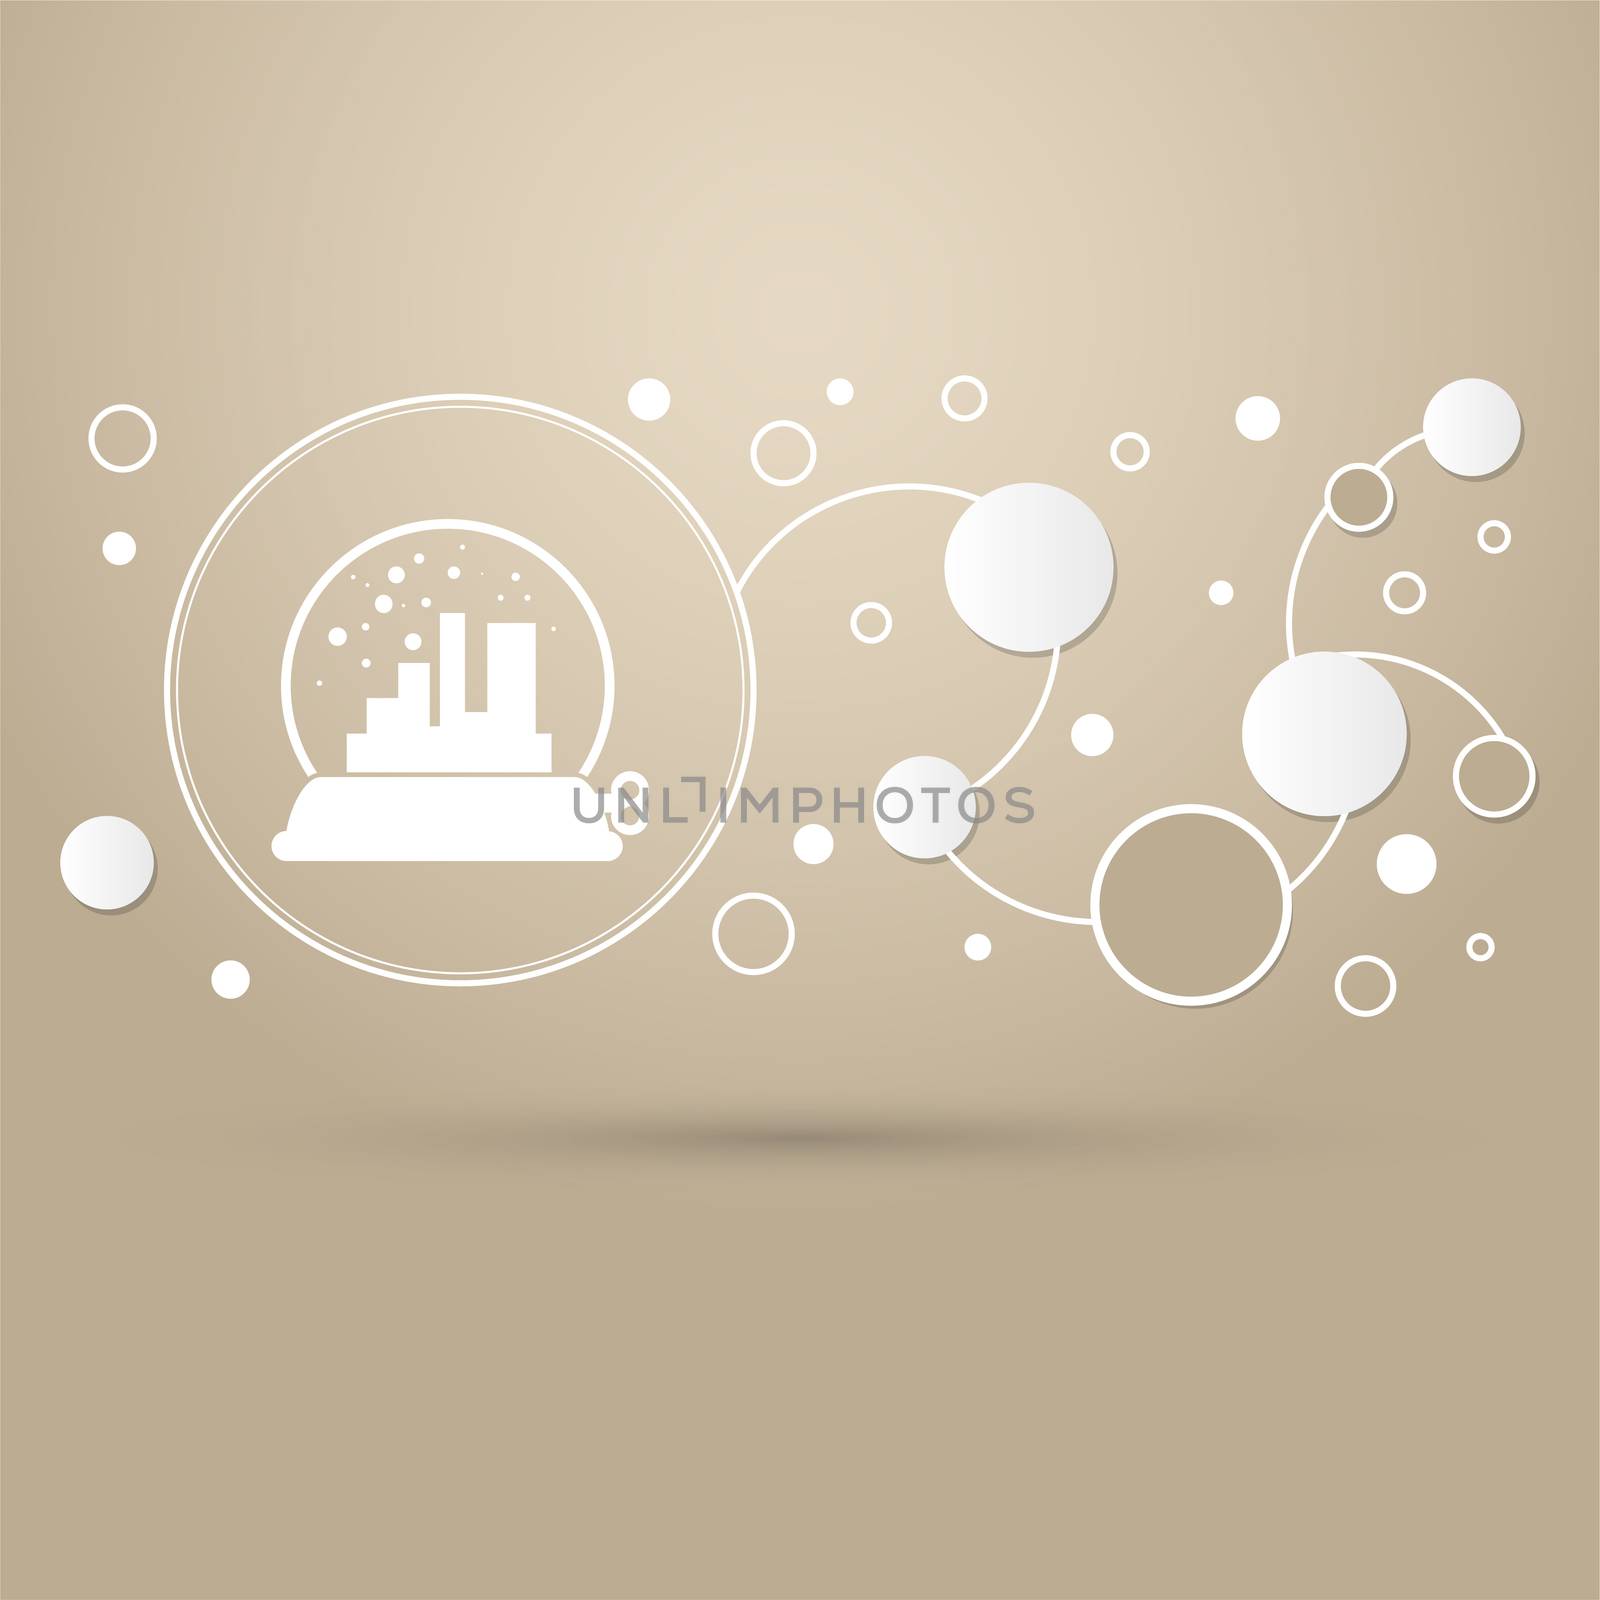 factory icon on a brown background with elegant style and modern design infographic. illustration